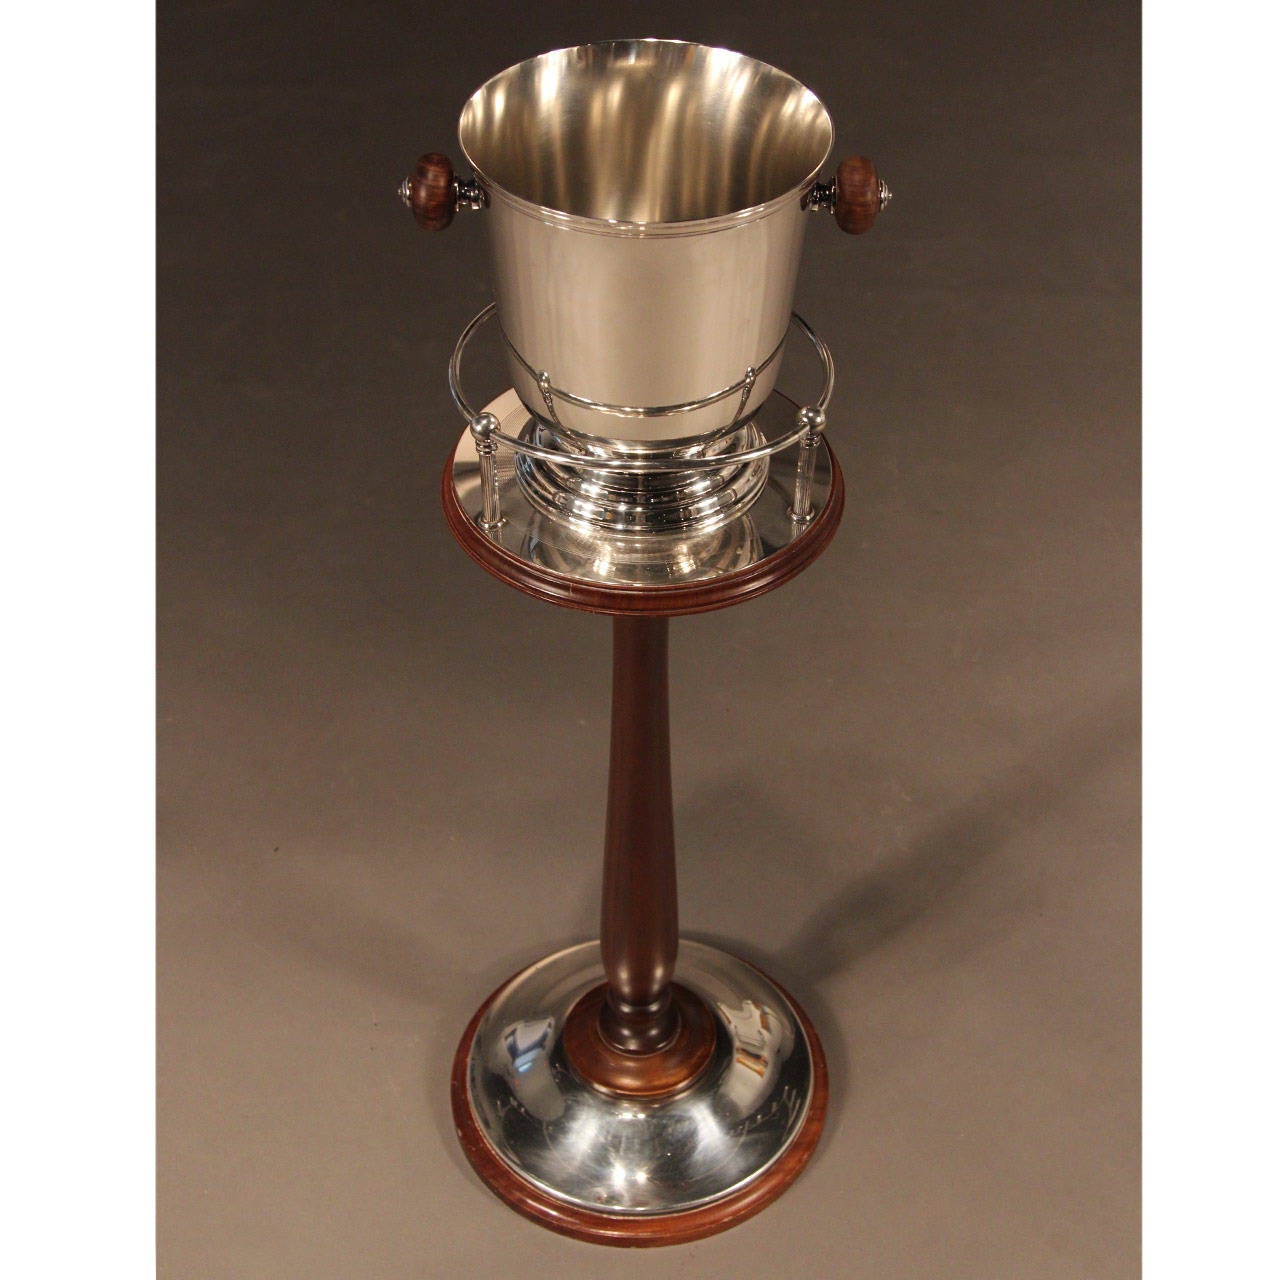 Beautiful silver plated champaign bucket on mahogany Stand by Christofle, France, with turned wood handles. Art Deco style. 

From the home of former Cartier President.